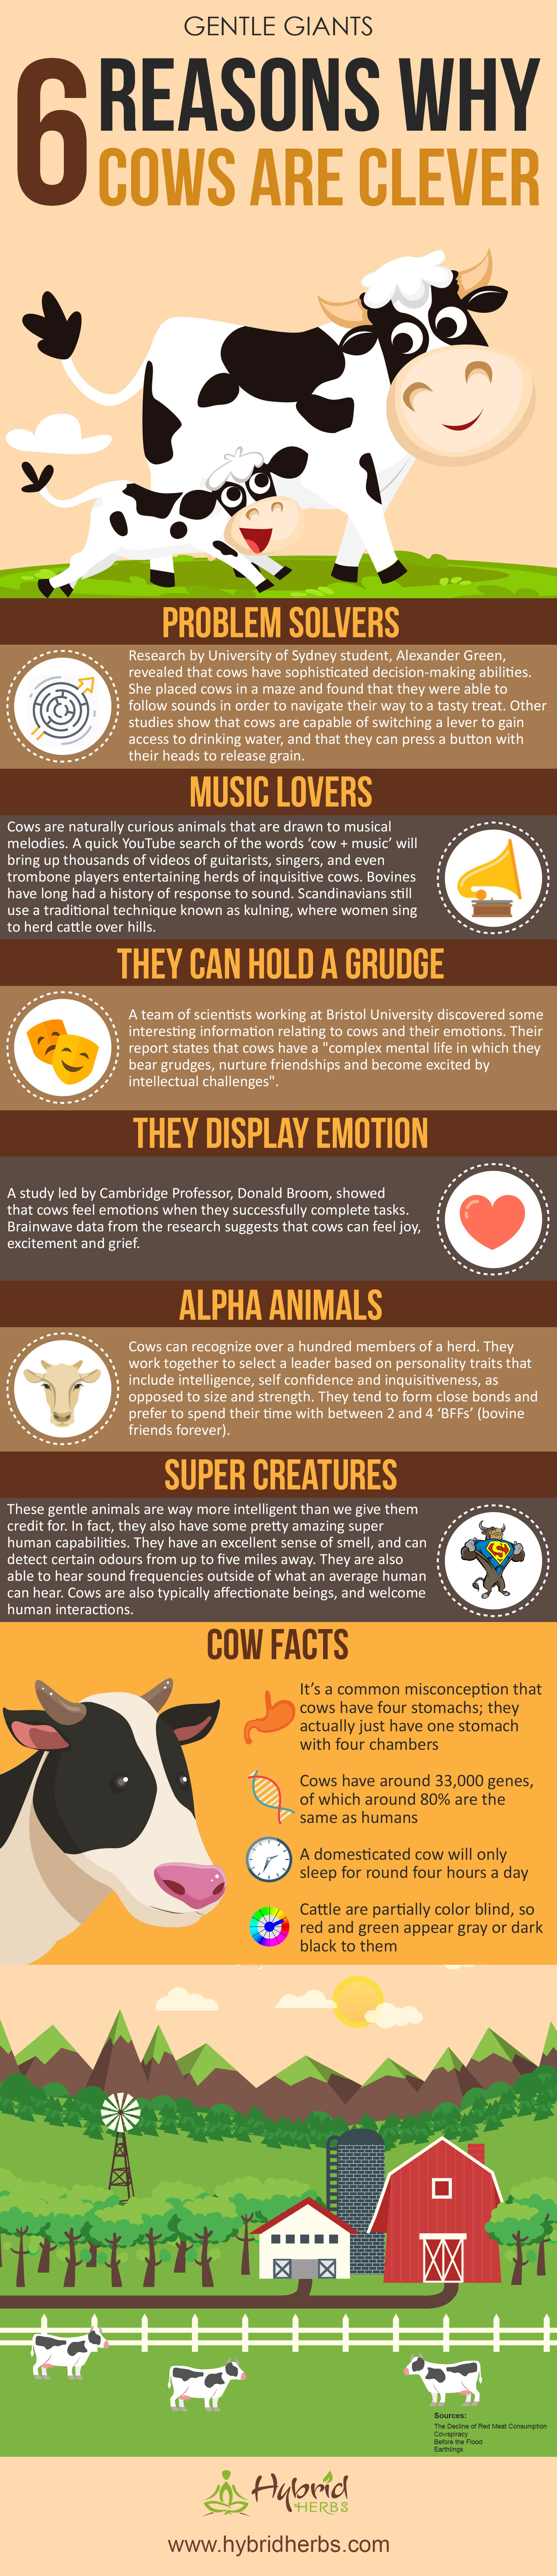 Gentle Giants: Six Reasons Why Cows are Clever - hybridherbs